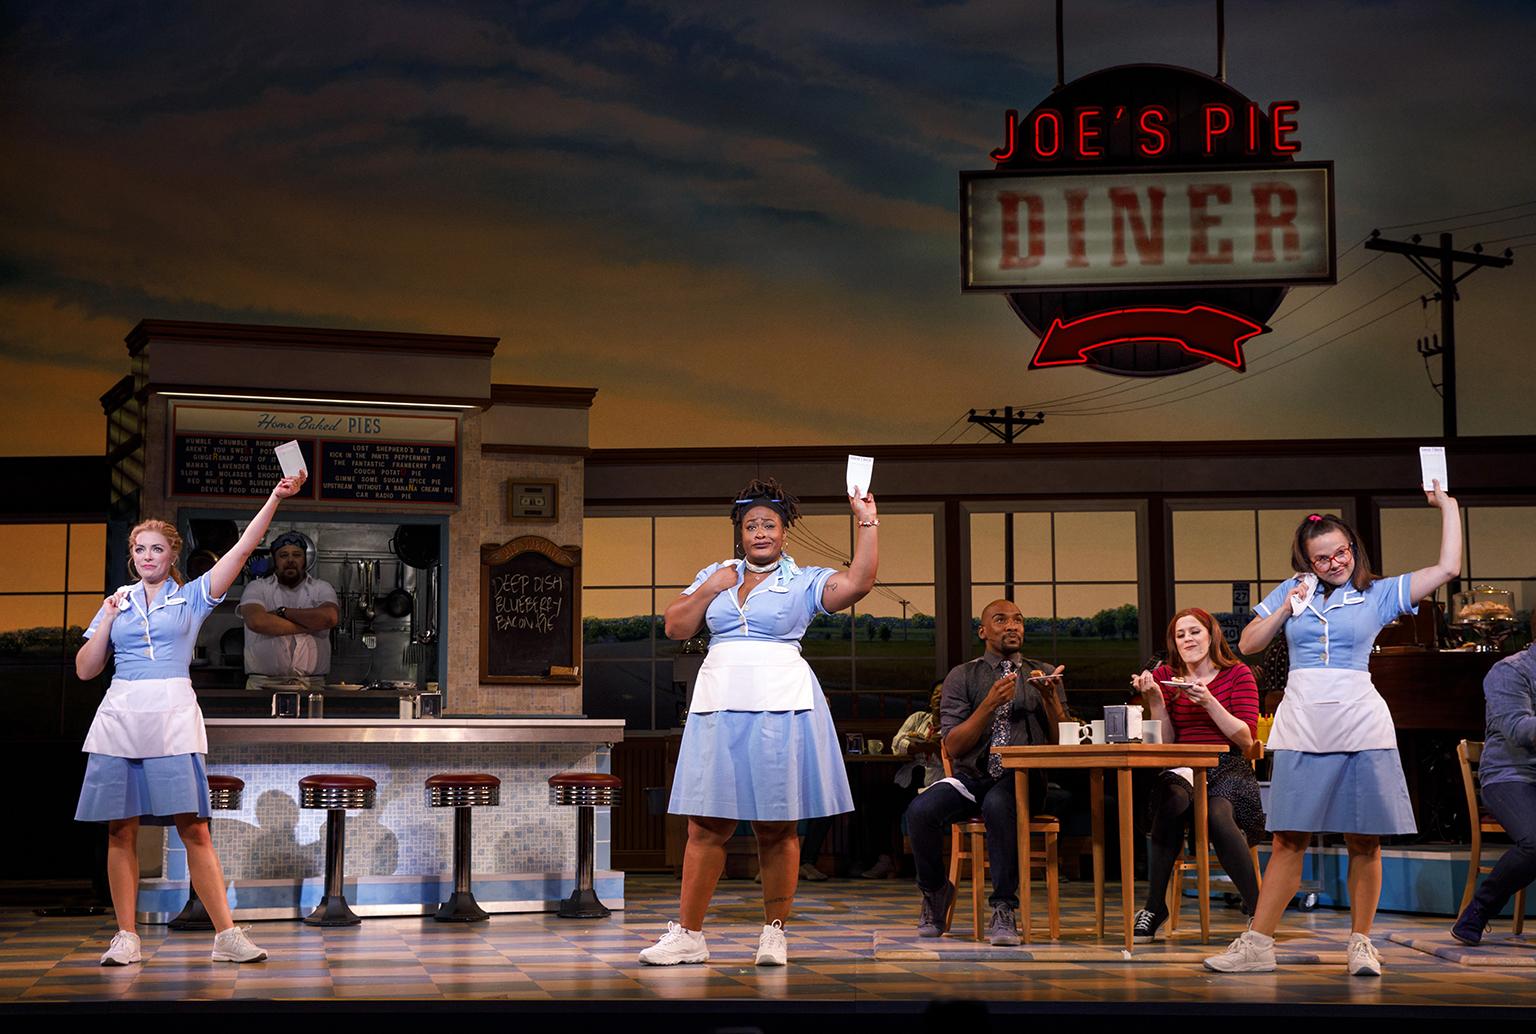 Desi Oakley, Charity Angel Dawson and Lenne Klingaman in the national tour of “Waitress.” (Credit: Joan Marcus)